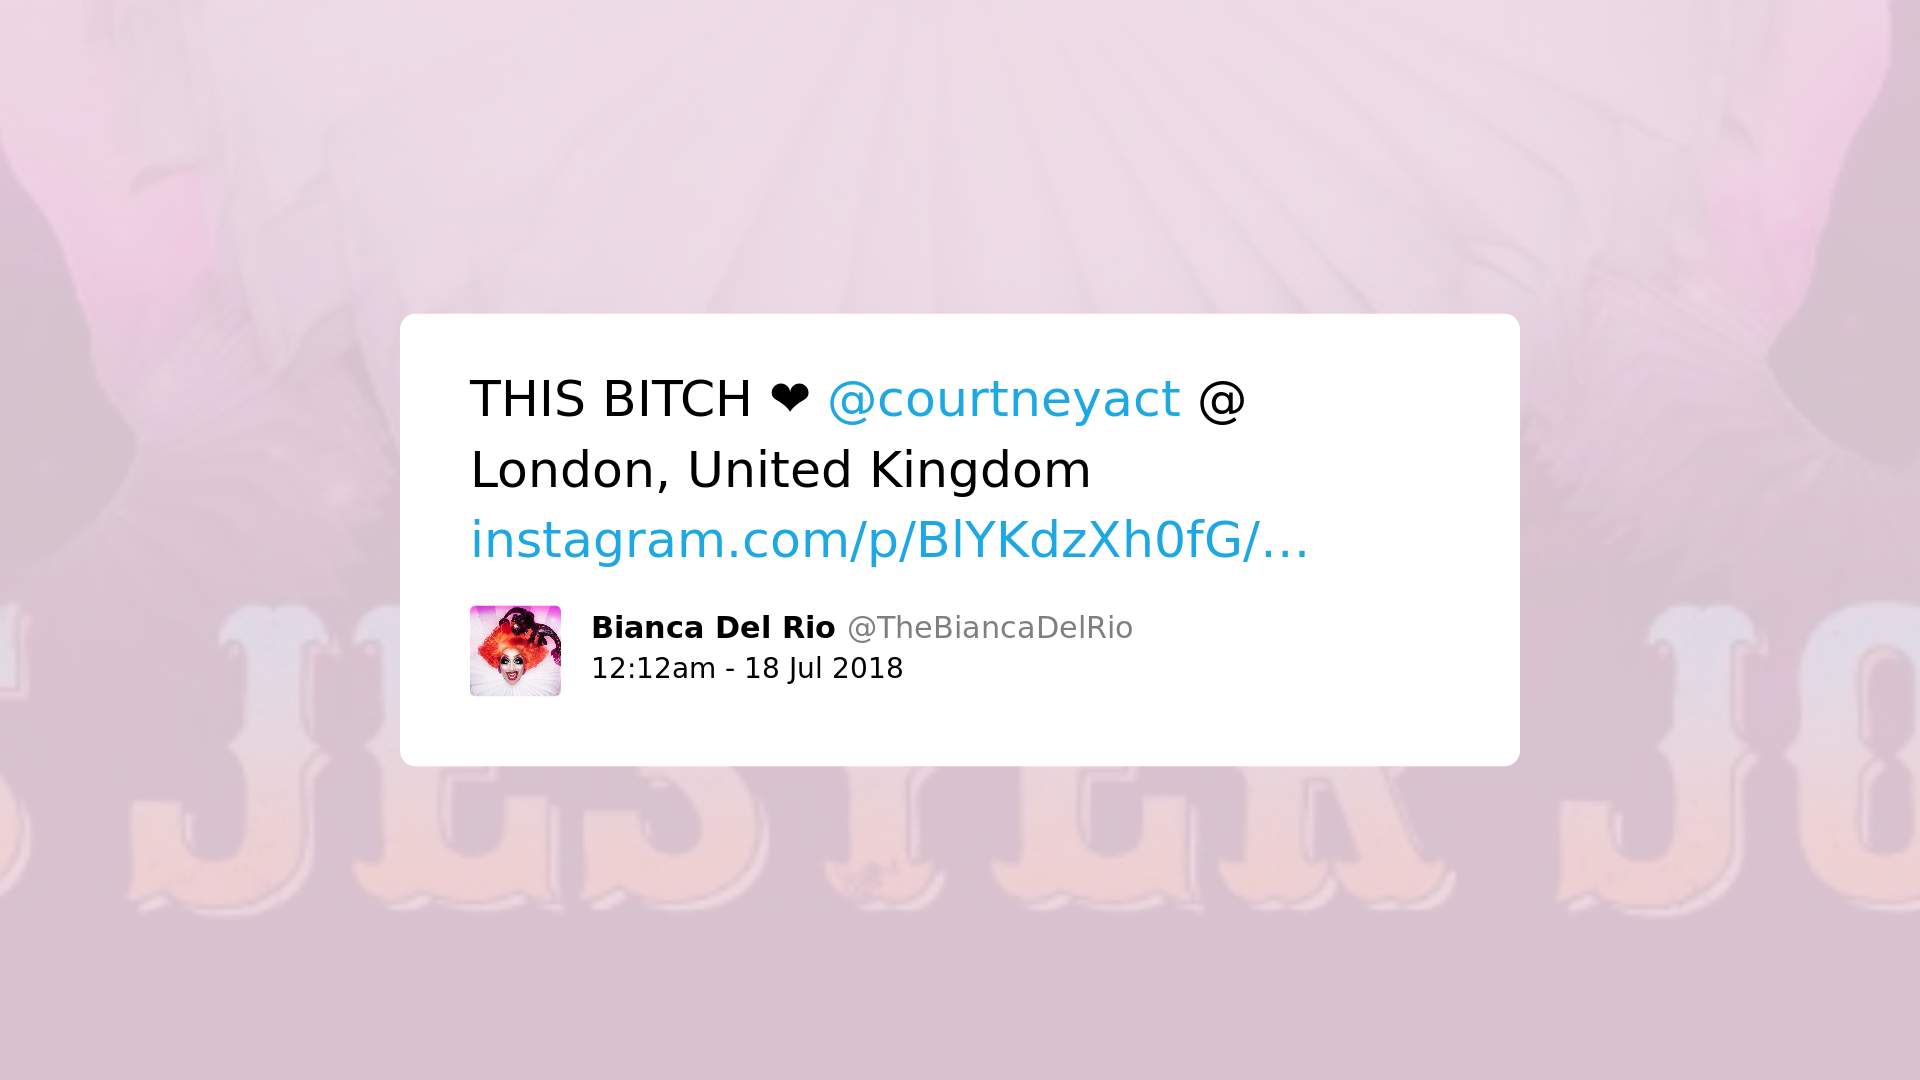 Print screen of a post by Bianca del Rio with the text: THIS BITCH S2 @courtneyact @London, United Kingdom. 